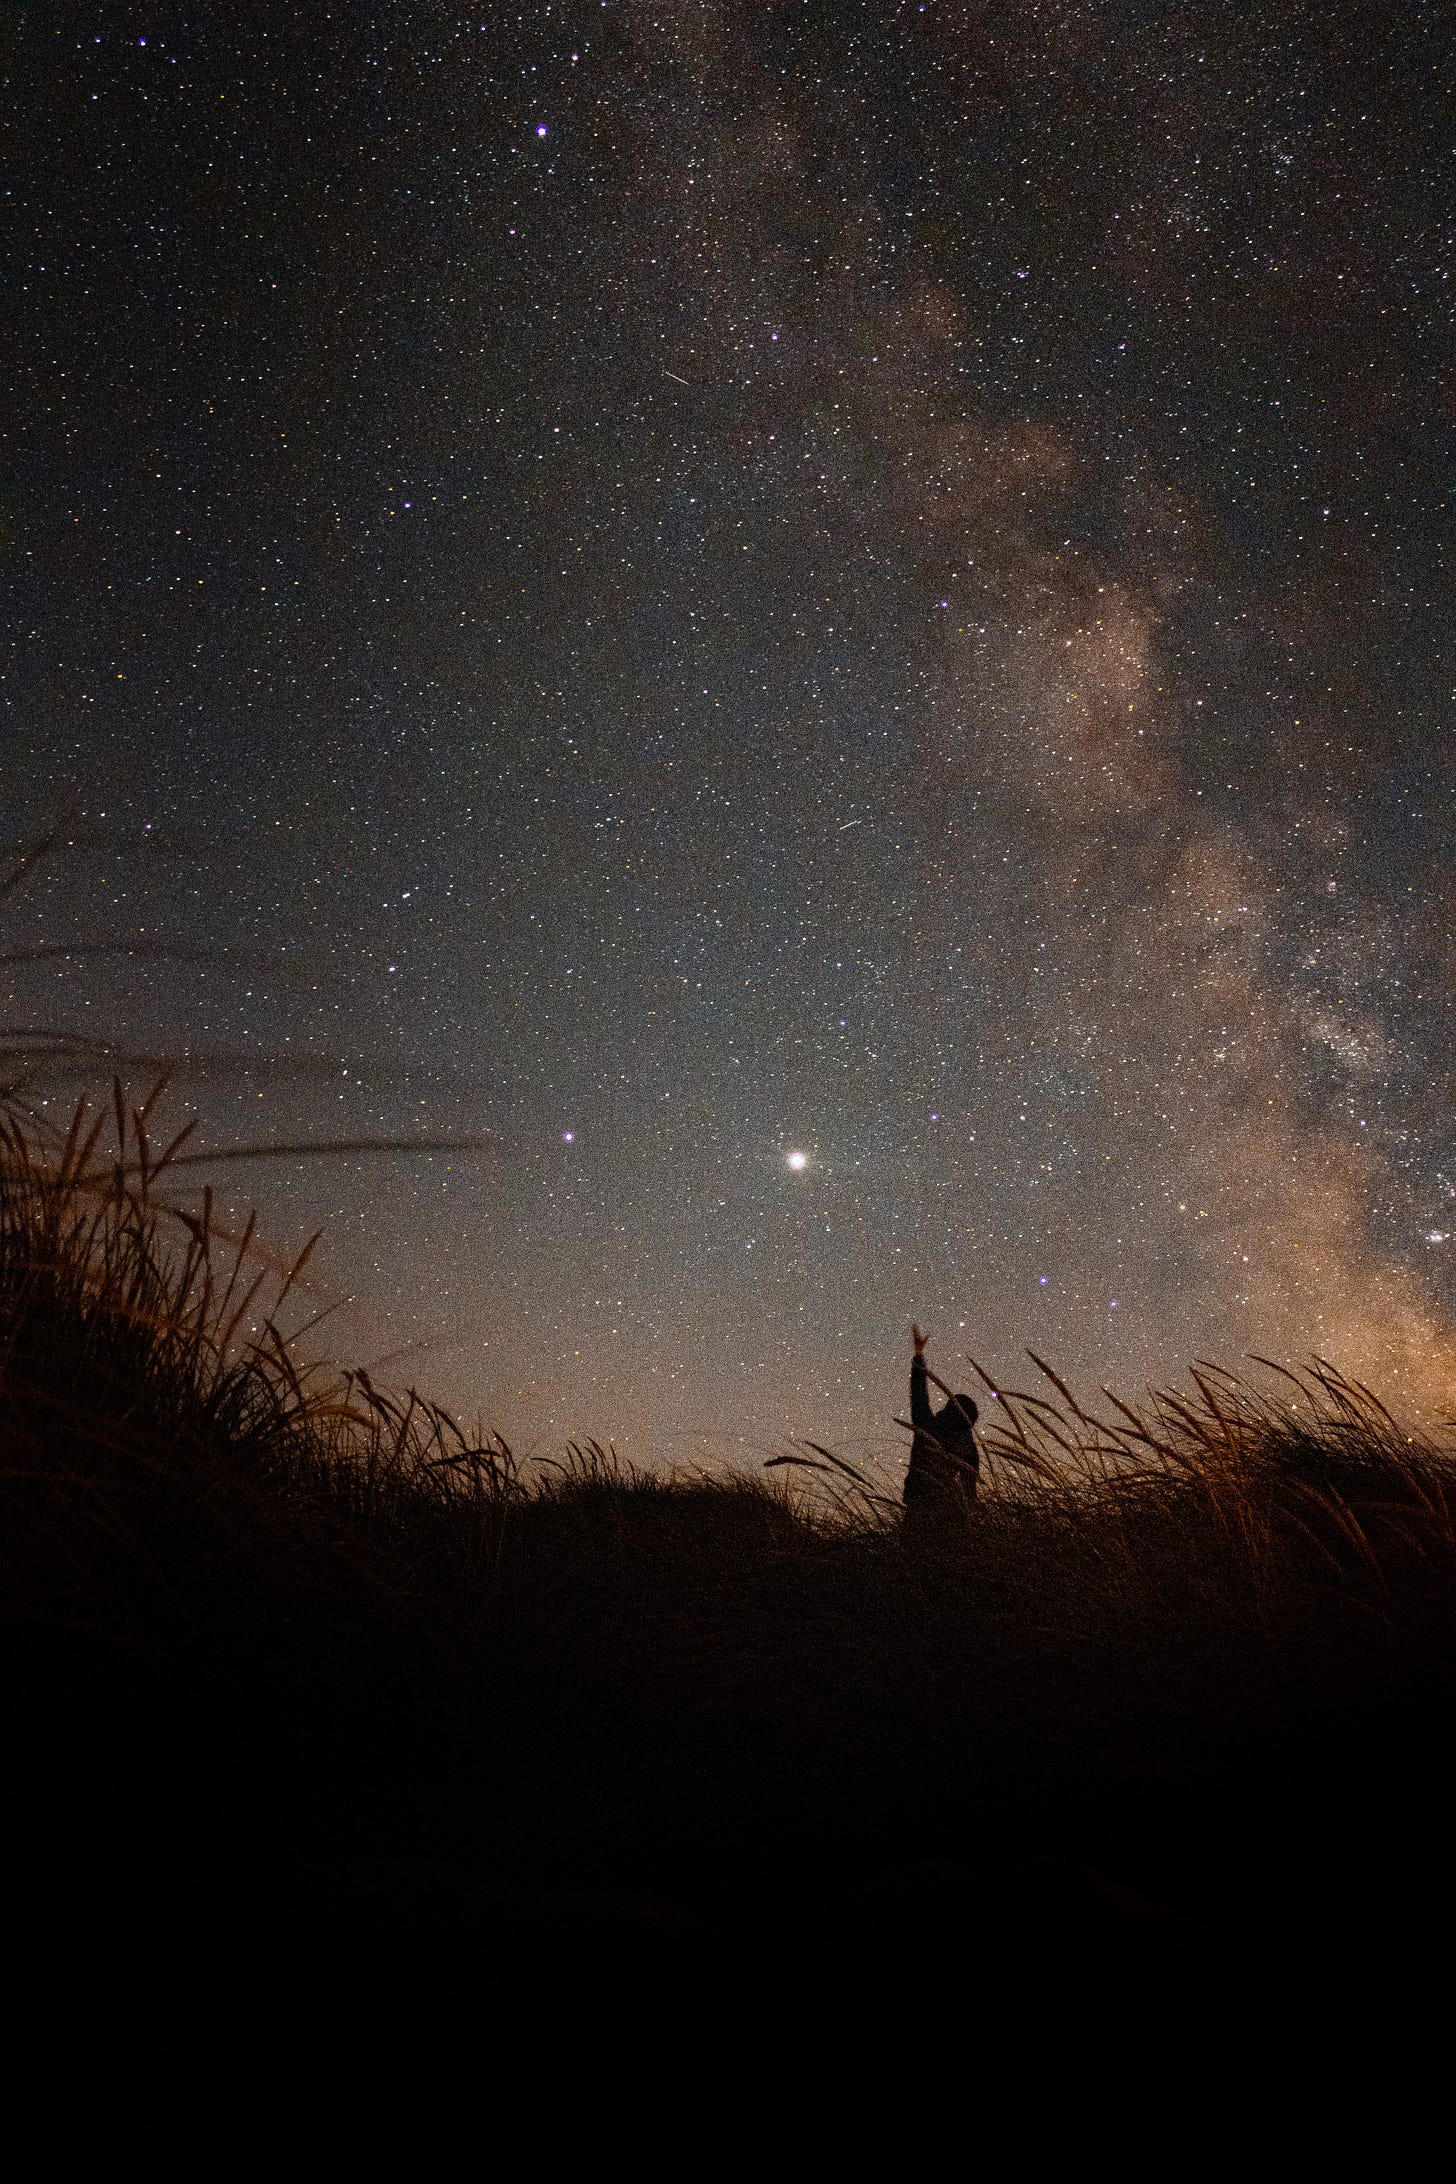 A photo of the night sky, including stars and the dusty stripe of the Milky Way. Silhouetted in the foreground is a person reaching one hand up towards the stars, while standing or sitting in a field of wheat.